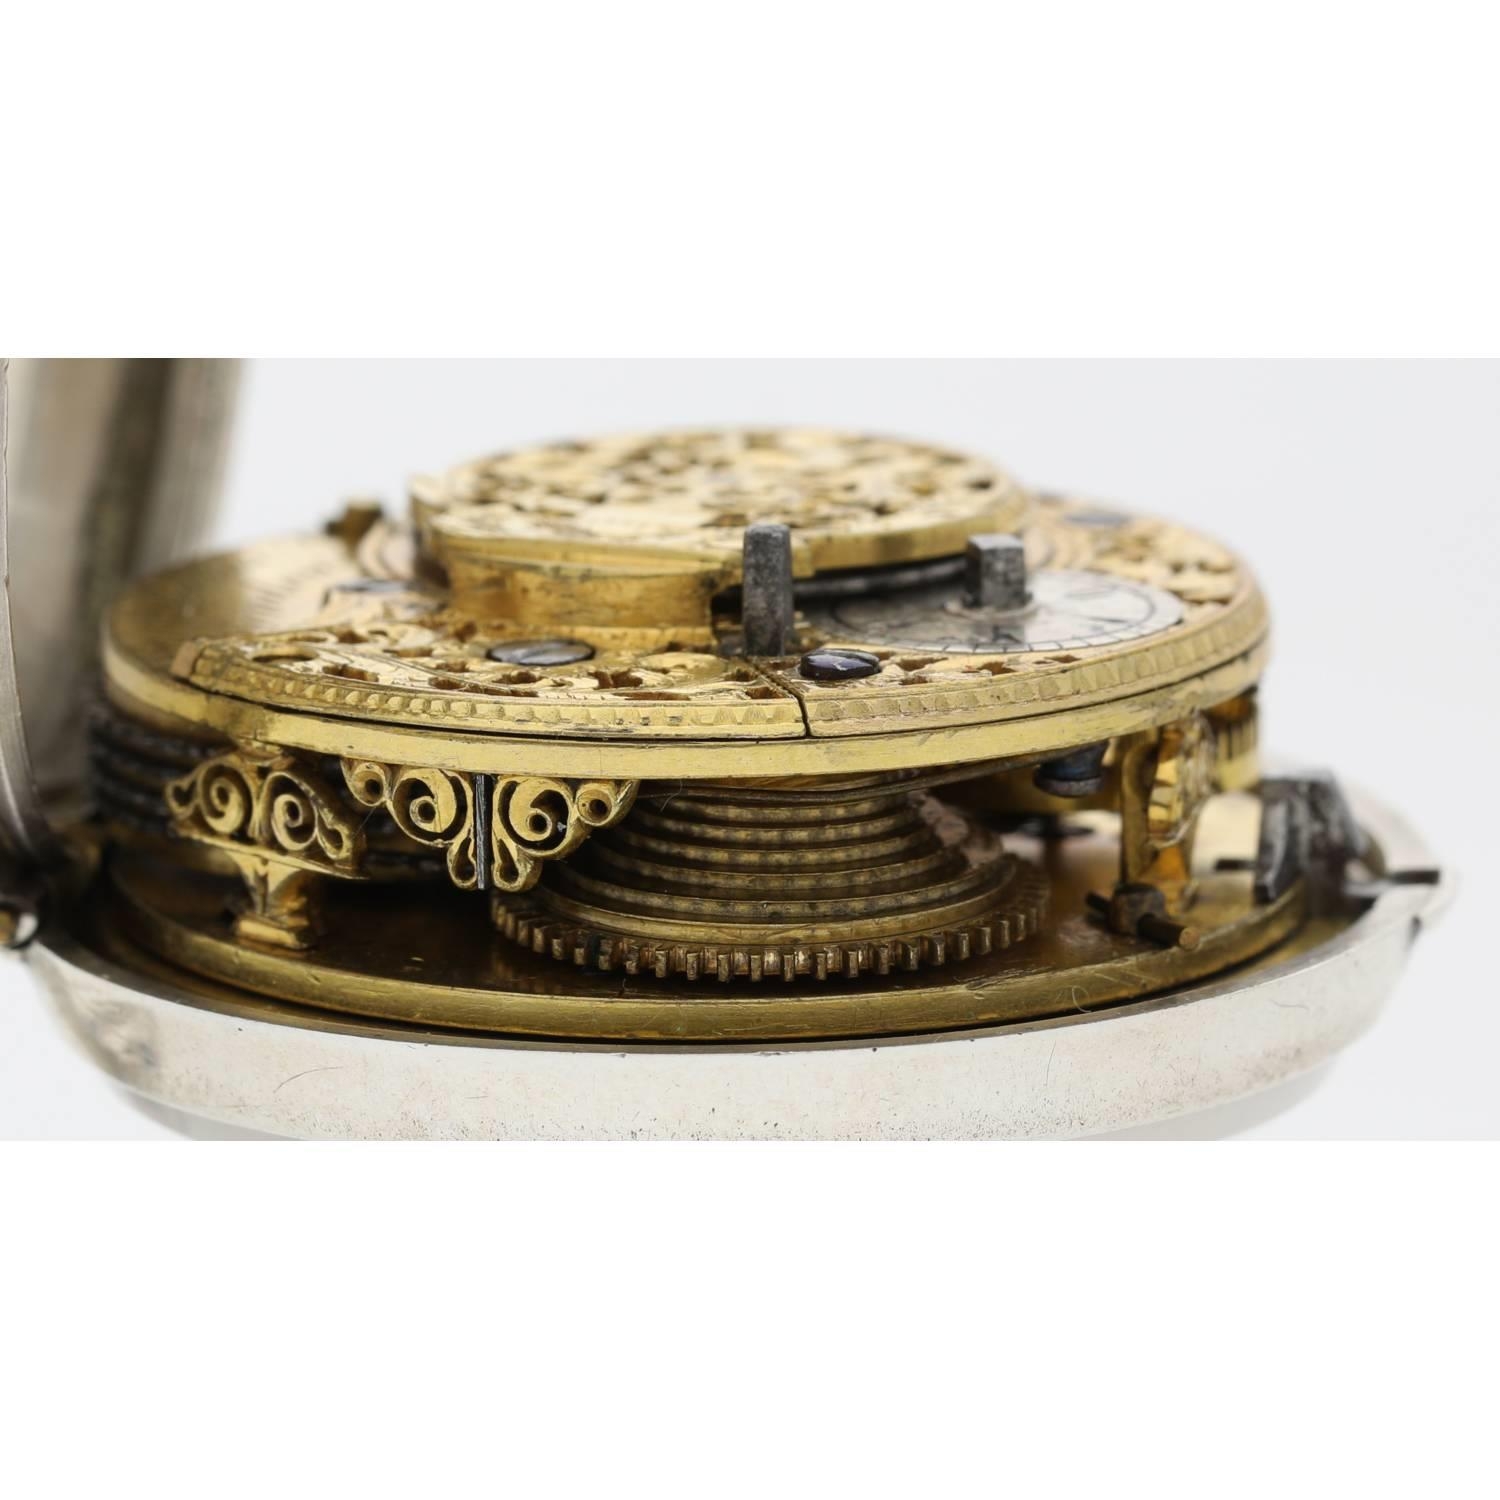 Edward Prior, London - 19th century silver pair cased verge pocket watch made for the Turkish - Image 5 of 10